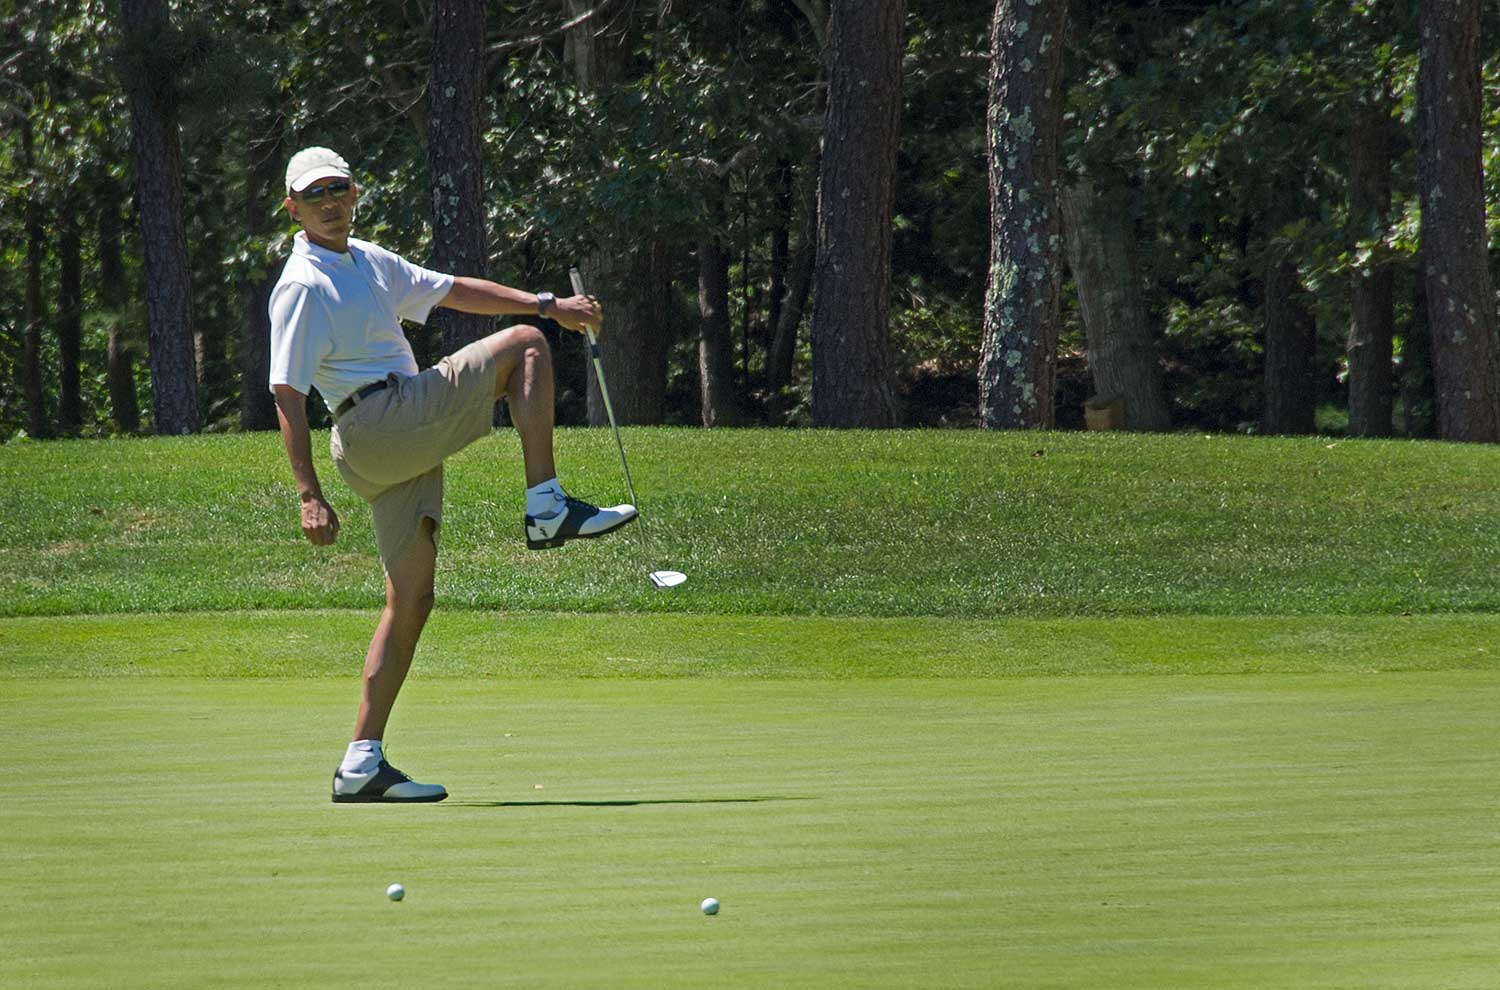 Obama tends to take a winter break in Hawaii, where he was born and raised, and a summer vacation in Martha's Vineyard. In between, he plays basketball and has been known to do some skeet shooting at Camp David. His favorite pastime, no matter the location, has become easy to spot: golf. (Jim Watson—AFP/Getty Images)